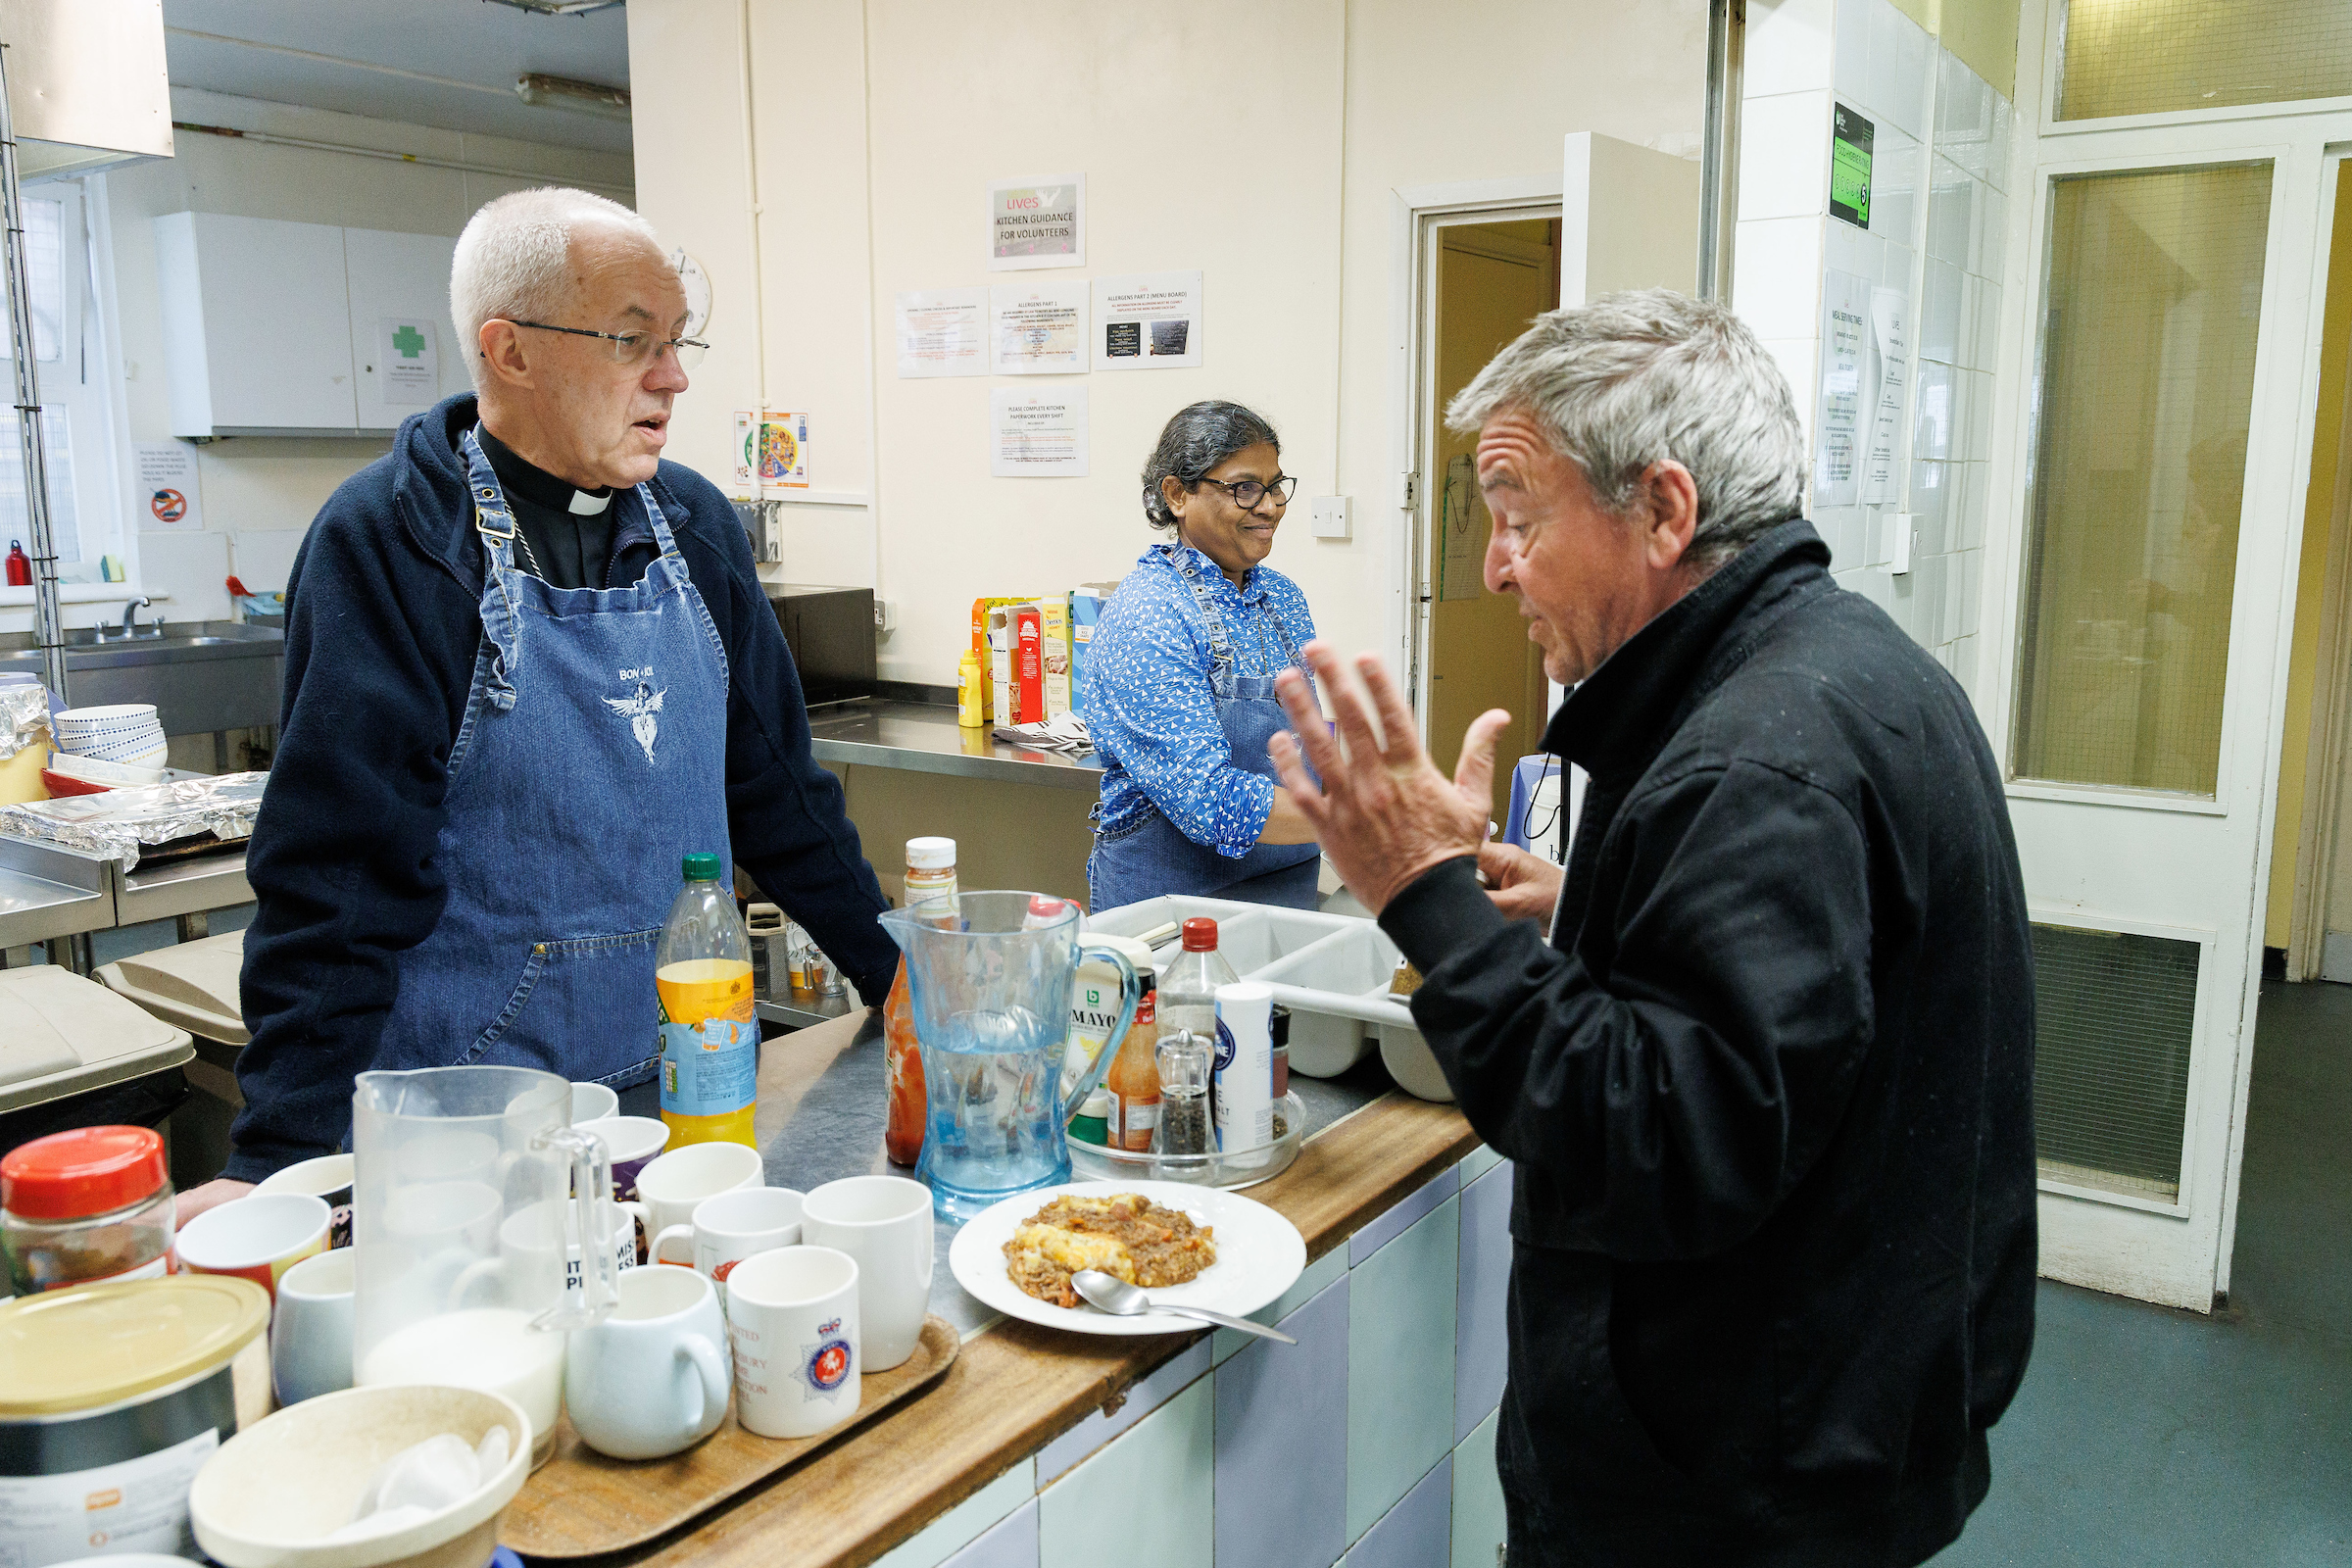 The Most Revd Justin Welby, Archbishop of Canterbury, serves lunch during his visit to the Catching Lives Open Centre